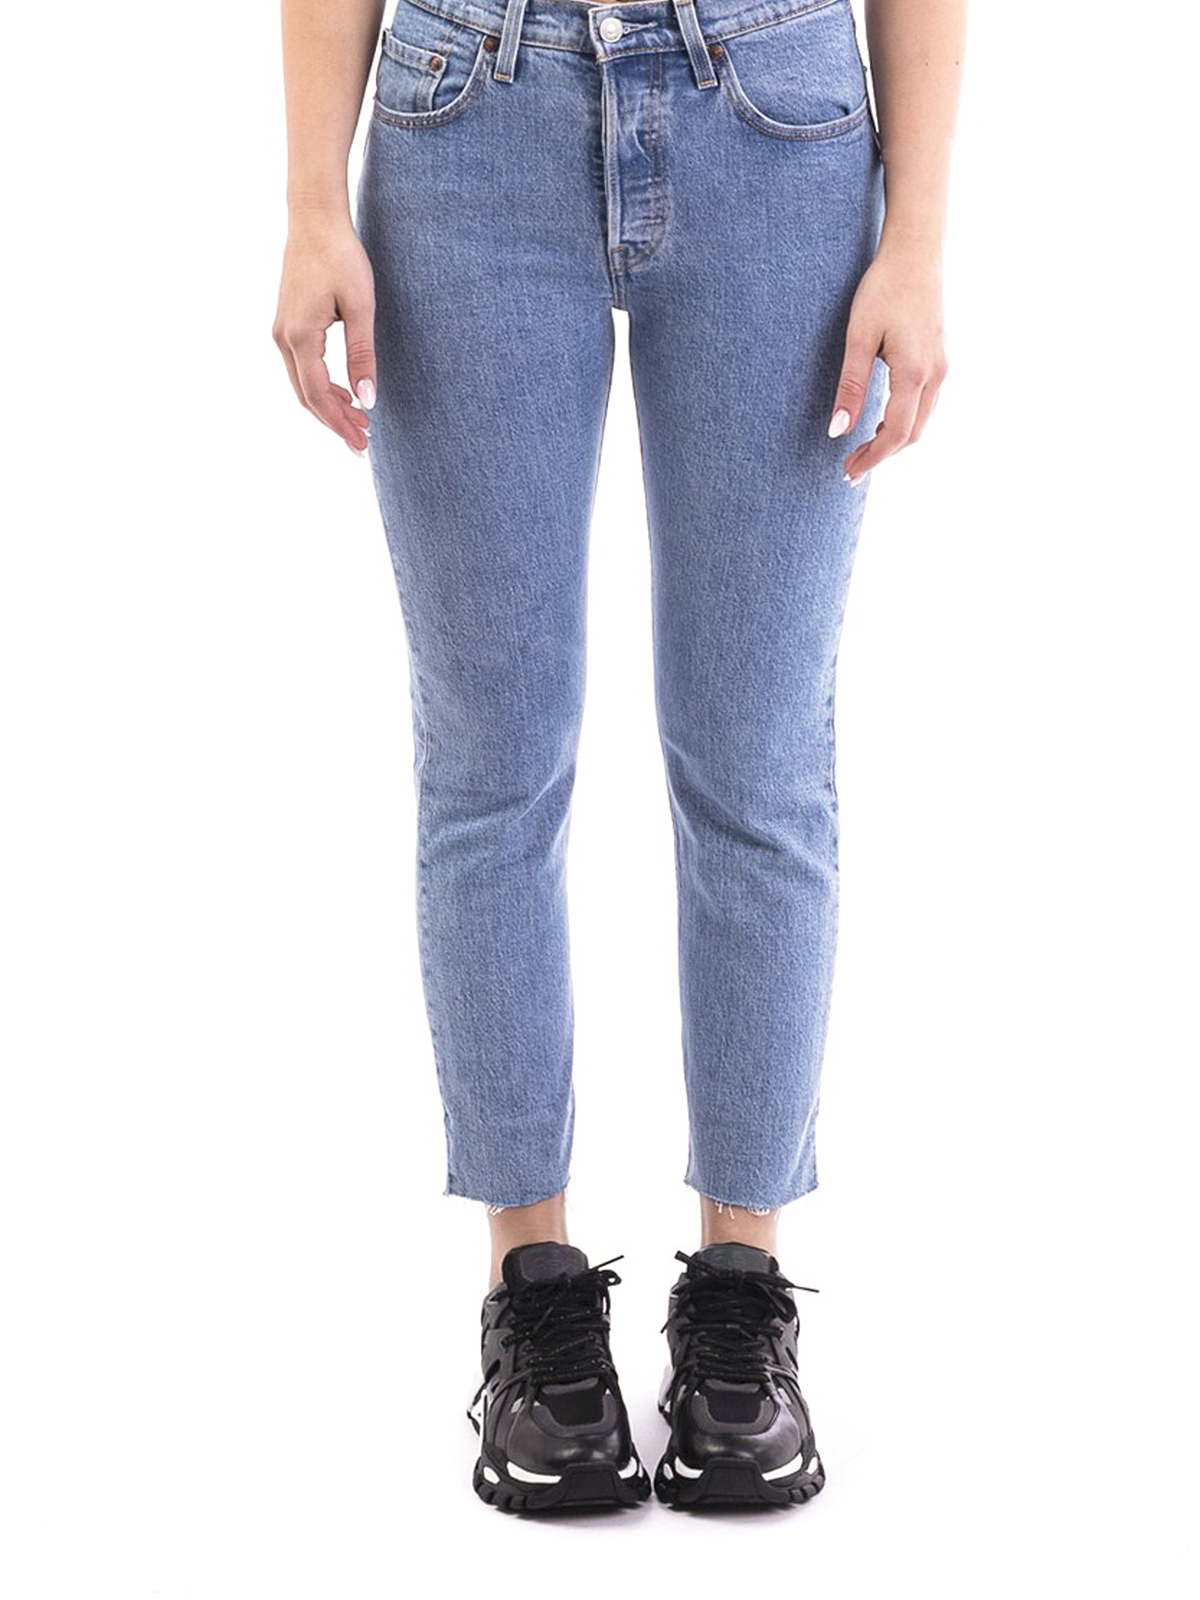 Straight leg jeans Levi'S - 501 Original cropped faded jeans - 36200009626